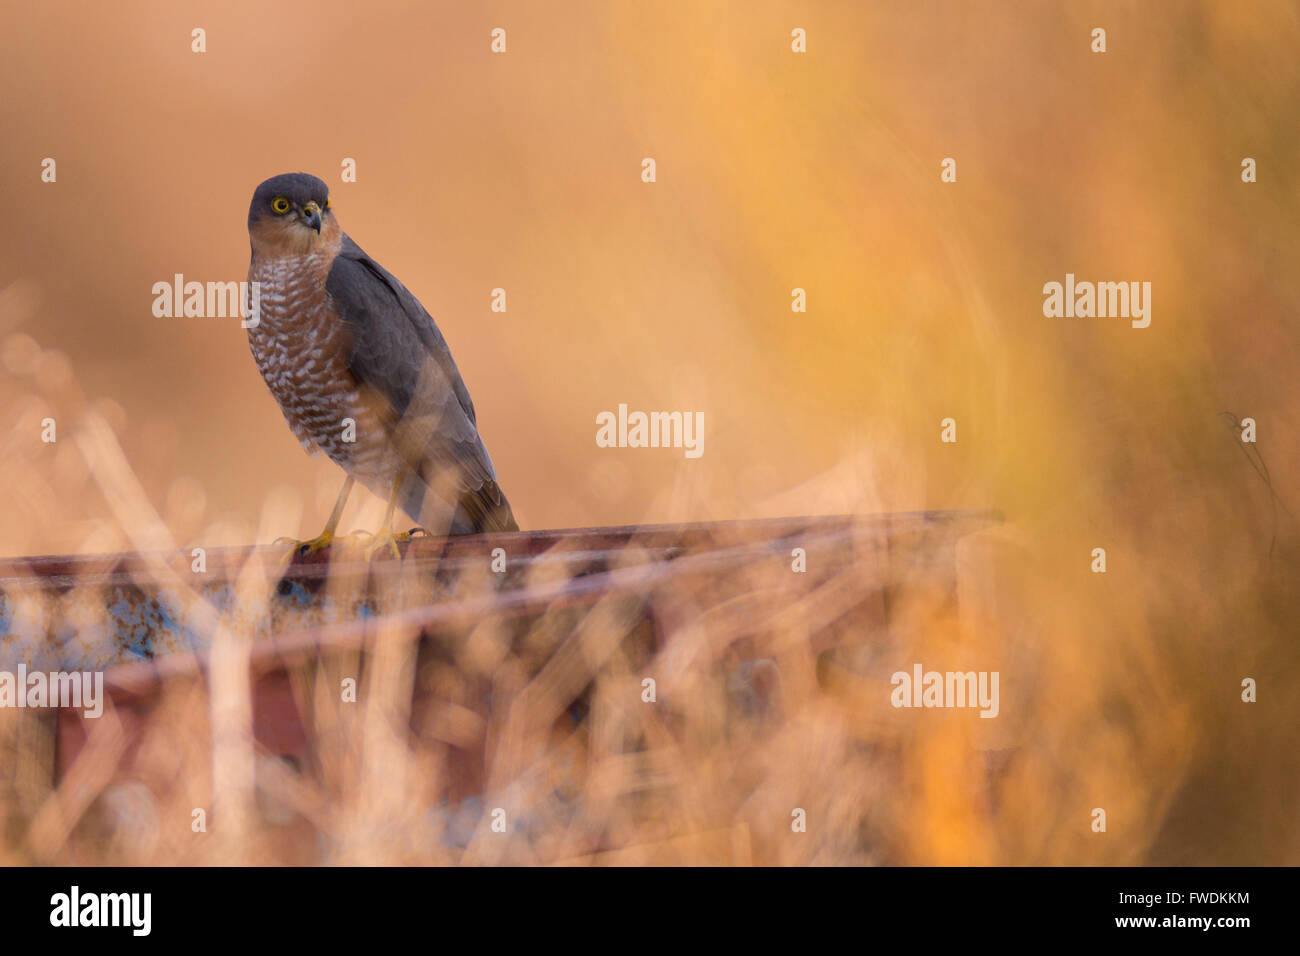 Eurasian Sparrowhawk (Accipiter nisus). his bird-of-prey is widespread across Europe, Asia and North Africa. A male adult reache Stock Photo